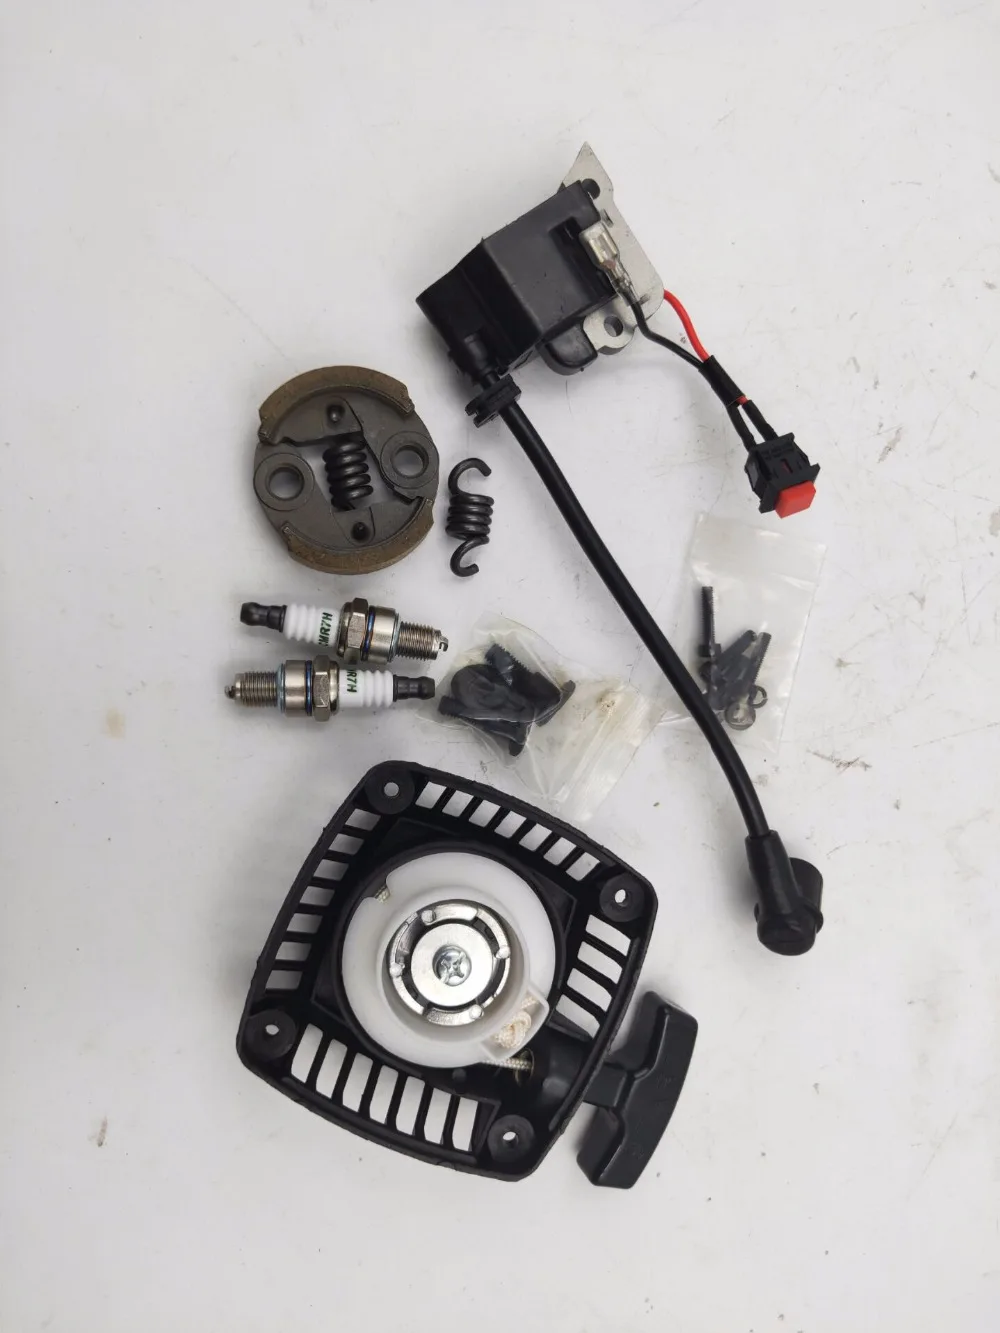 

8000rmp clutch Spark Plug pull starter Ignition Coil FOR Zenoah CY ROVAN ENGINES FOR HPI KM BAJA LOST PARTS